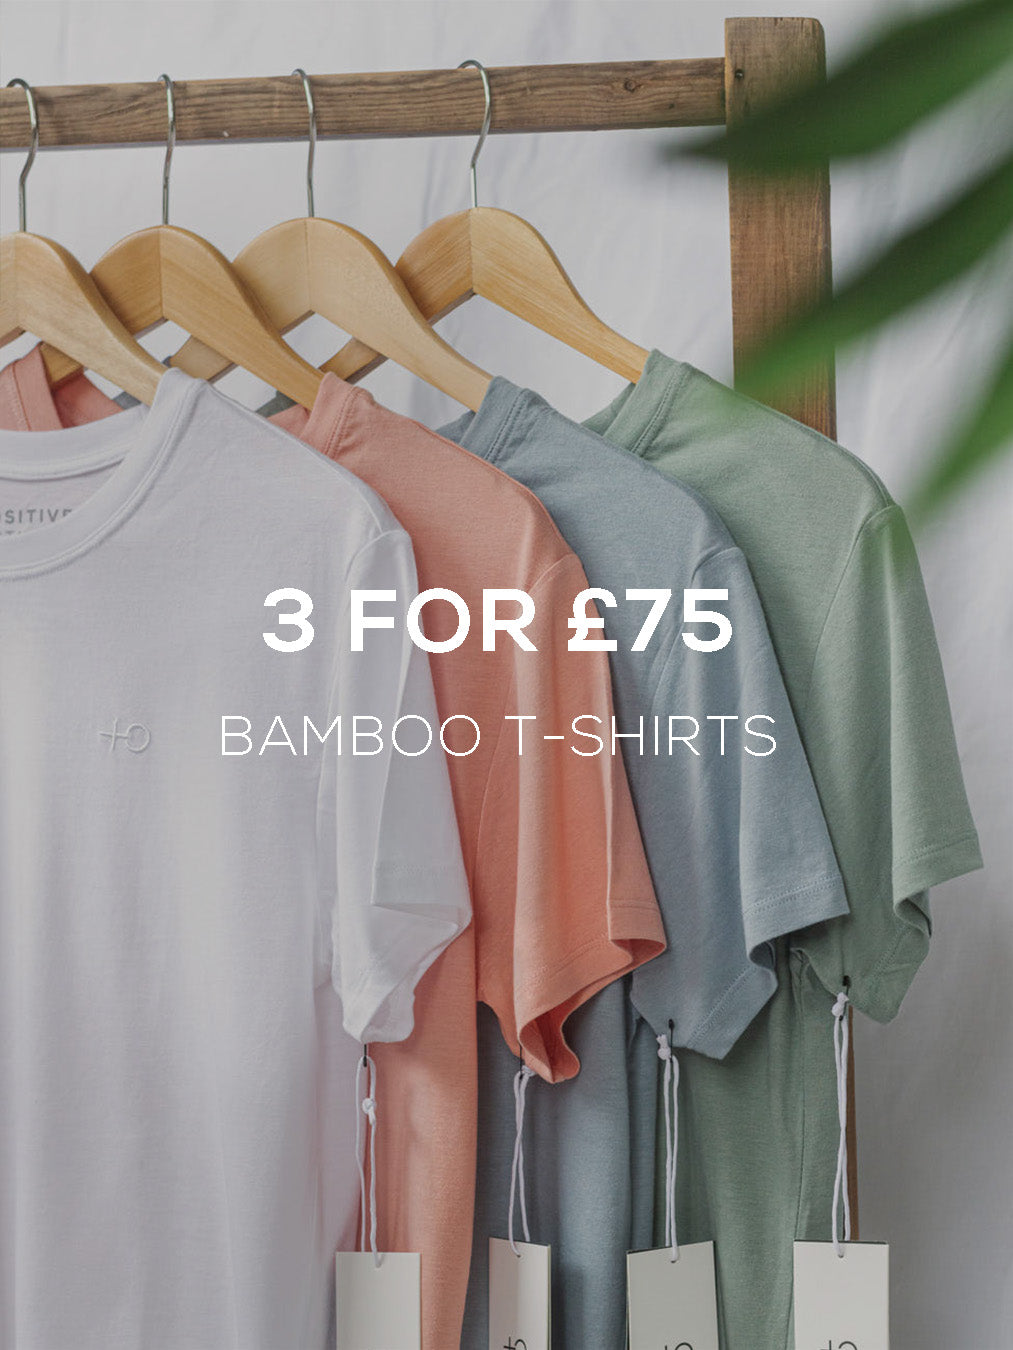 3 Bamboo Tees for £75 - Positive Outlook Clothing